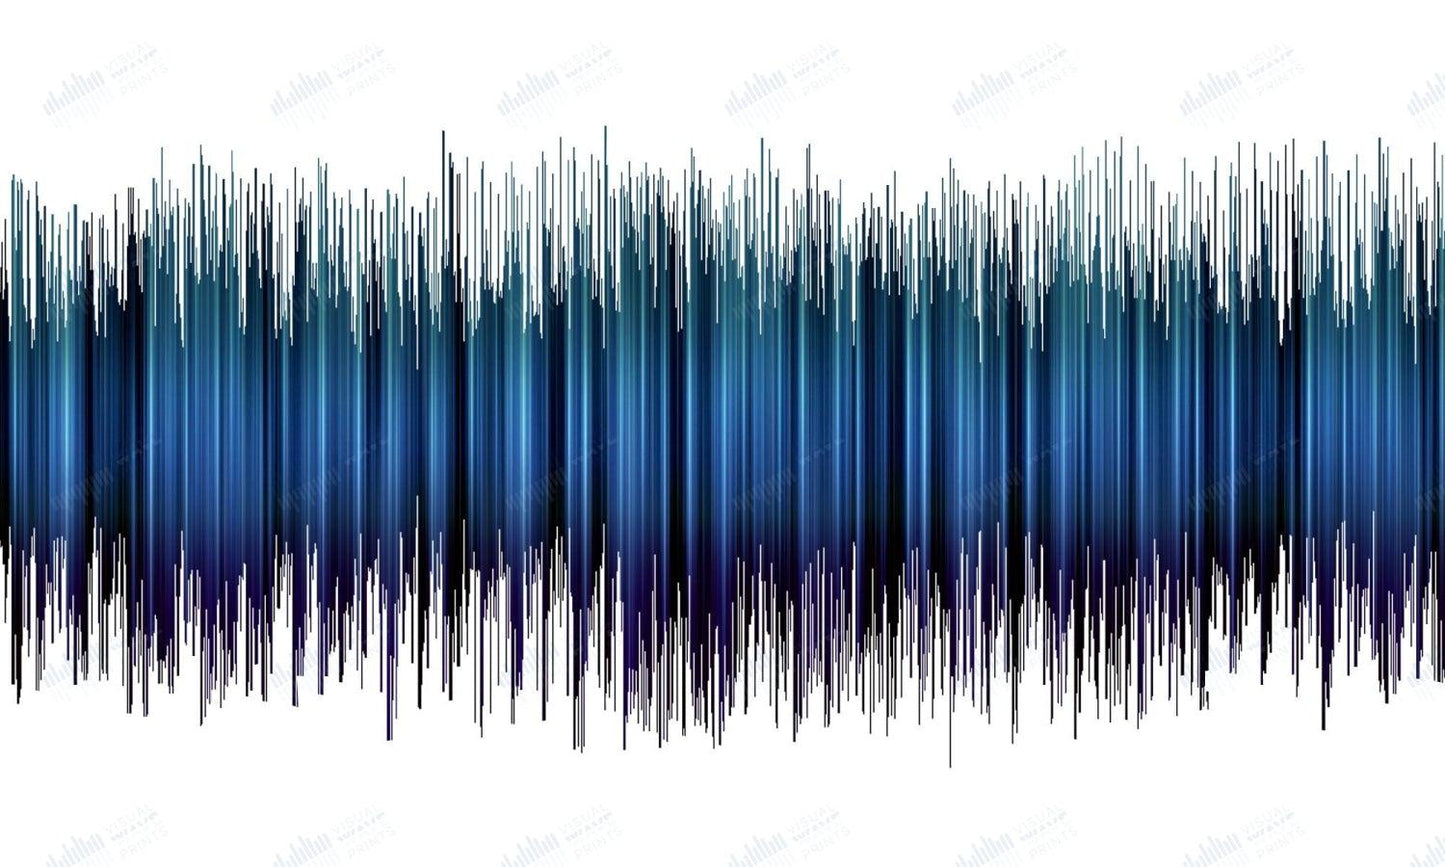 Inner City Blues by Marvin Gaye - Visual Wave Prints